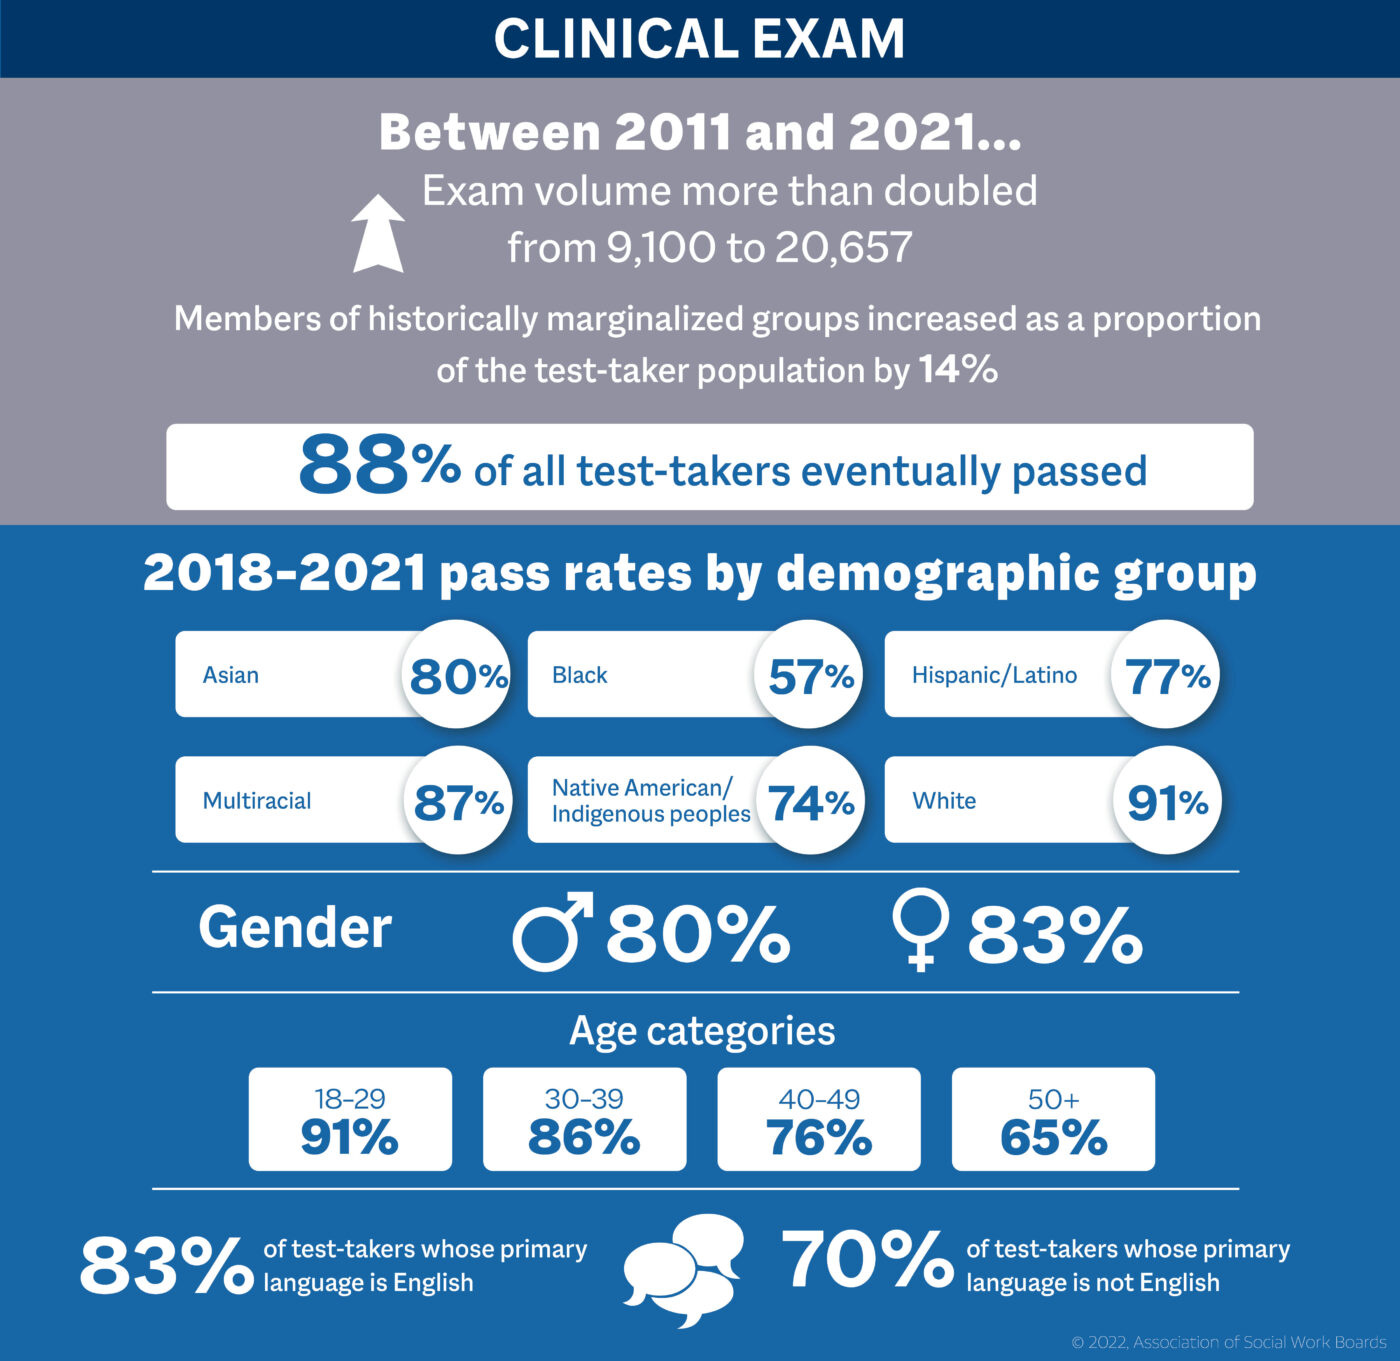 Informational graphic showing highlights of the exam pass rate data for the Clinical exam. Exam volume more than doubled between 2011 and 2021, from 9,100 exams in 2011 to 20,657 exams in 2021. Members of historically marginalized groups made up 14% more of the test-taker population in 2021 than in 2011. 88% of all test-takers eventually passed. The following percentages apply to test-takers from 2018 through 2021. 80% of Asian test-takers eventually passed. 57% of Black test-takers eventually passed. 77% of Hispanic/Latino test-takers eventually passed. 87% of multiracial test-takers eventually passed. 74% of Native American/Indigenous peoples eventually passed. 91% of White test-takers eventually passed. 80% of men eventually passed. 83% of women eventually passed. 91% of test-takers 18 years old to 29 years old eventually passed. 86% of test-takers 30 years old to 39 years old eventually passed. 76% of test-takers 40 years old to 49 years old eventually passed. 65% of test-takers 50 years old or older eventually passed. 83% of test-takers whose primary language is English eventually passed. 70% of test-takers whose primary language is not English eventually passed.